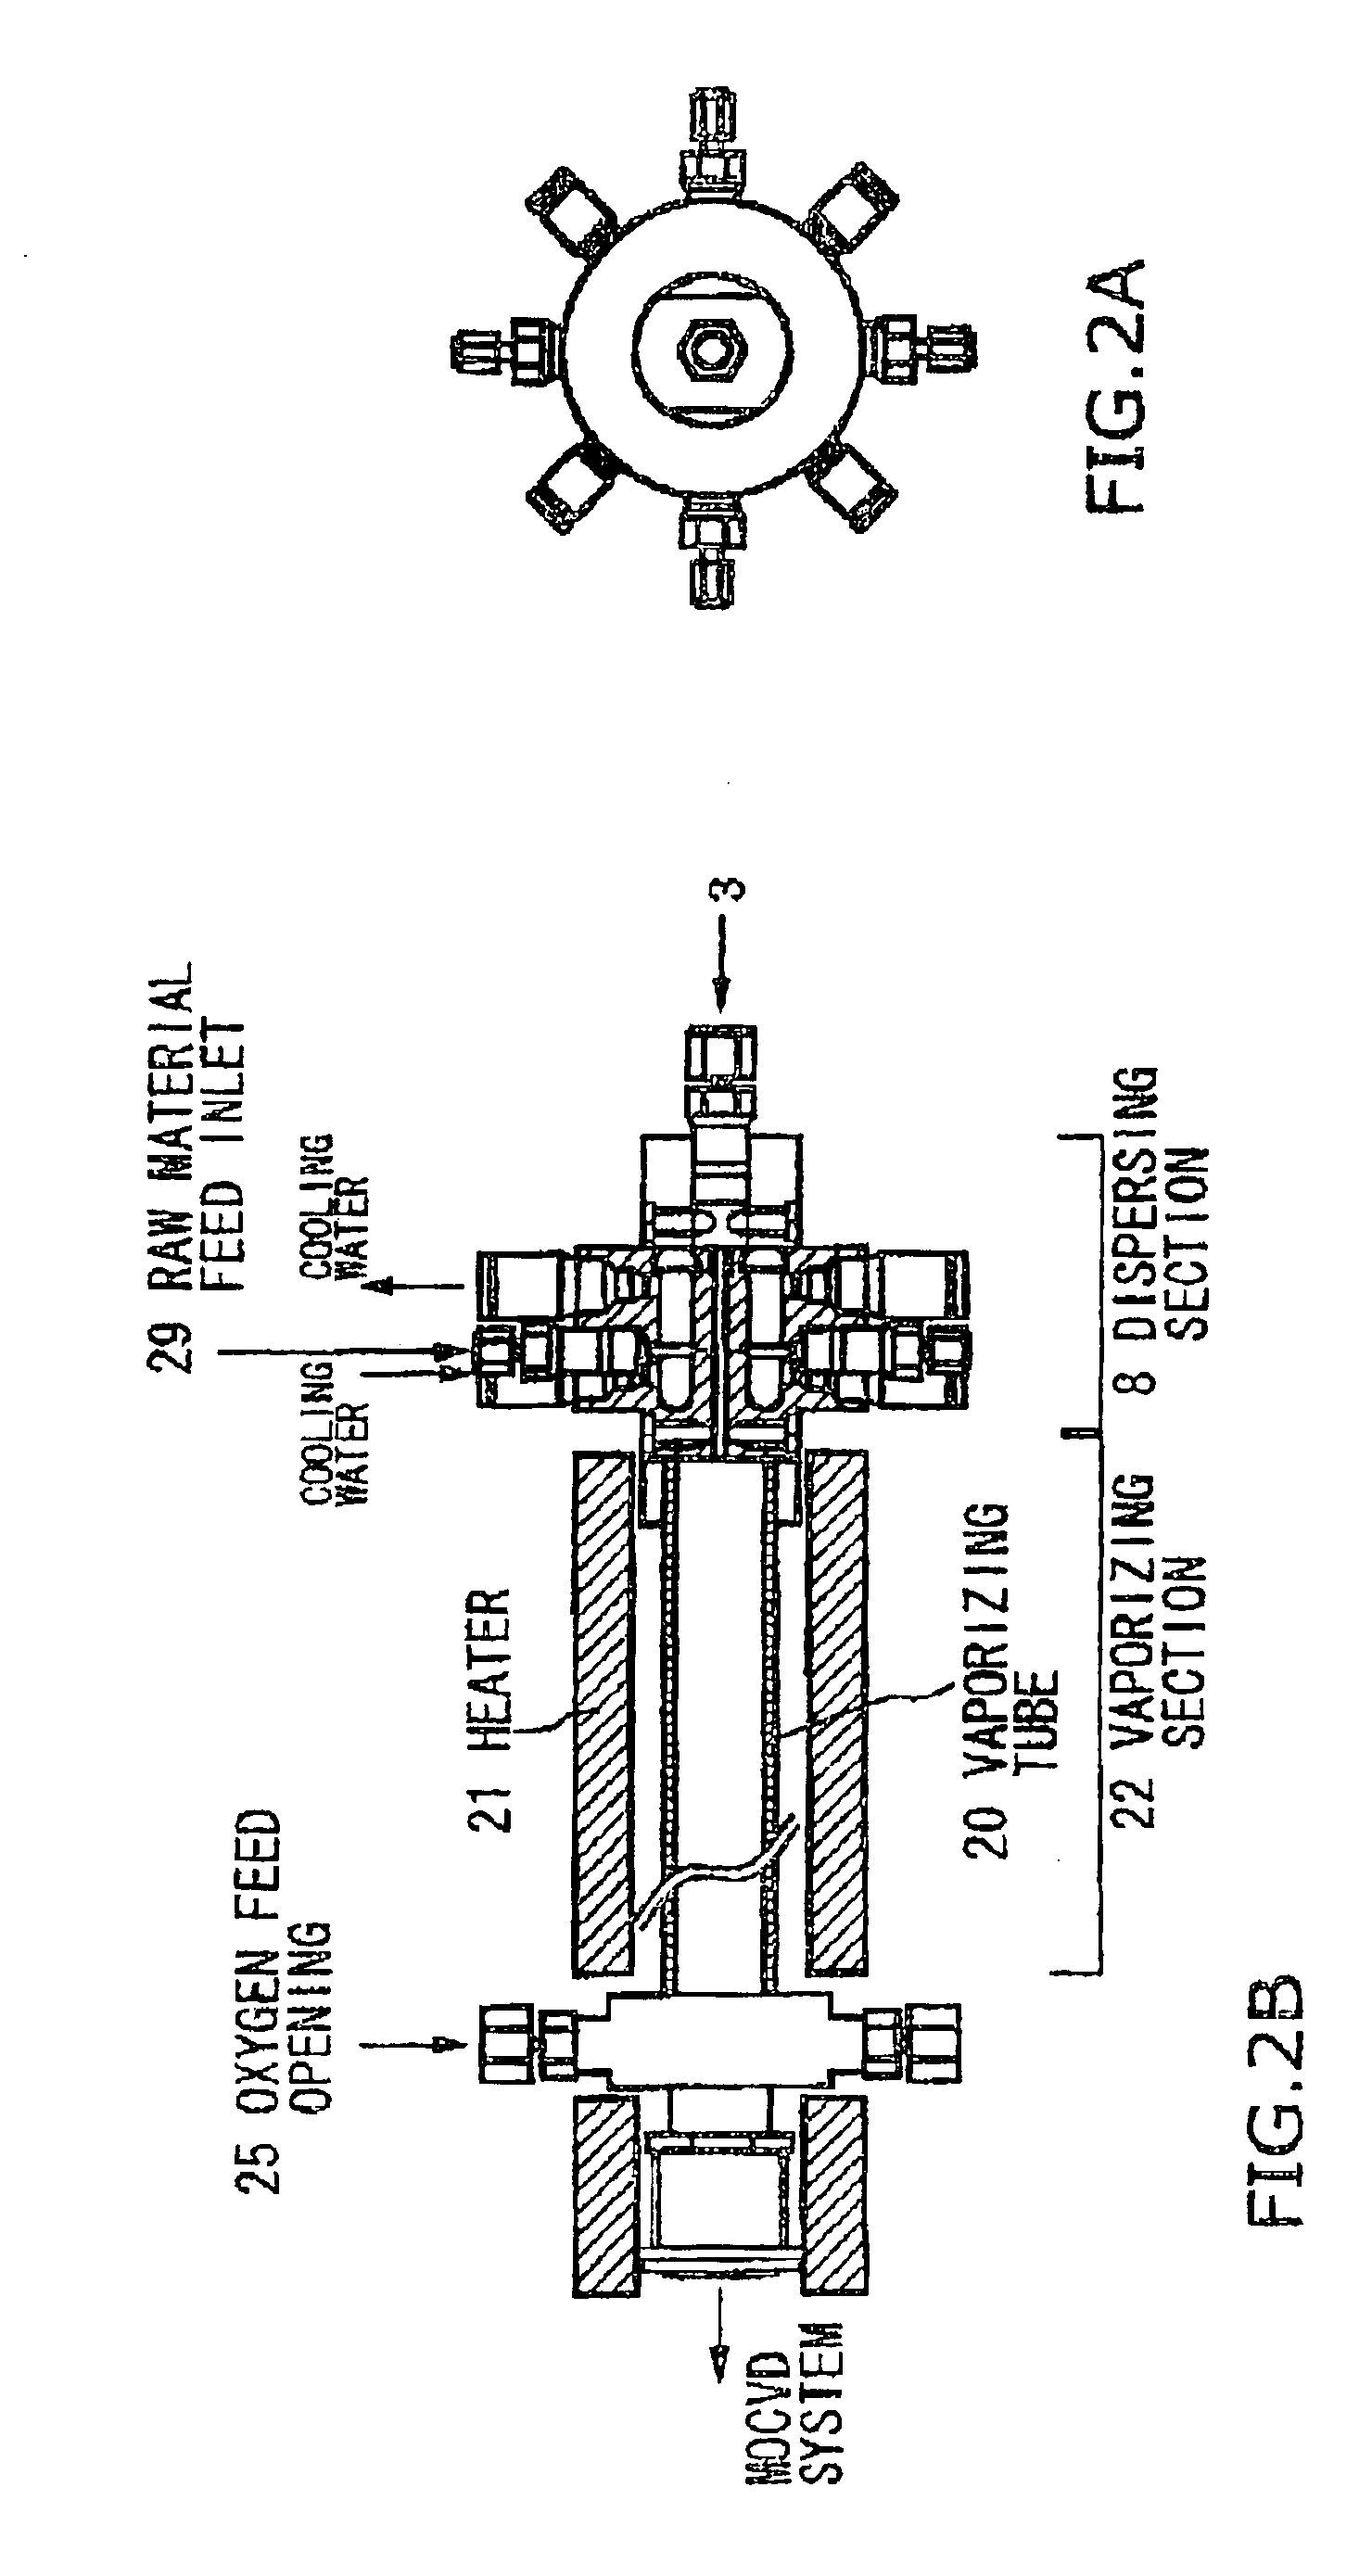 Vaporizer for MOCVD and method of vaporizing raw material solutions for MOCVD